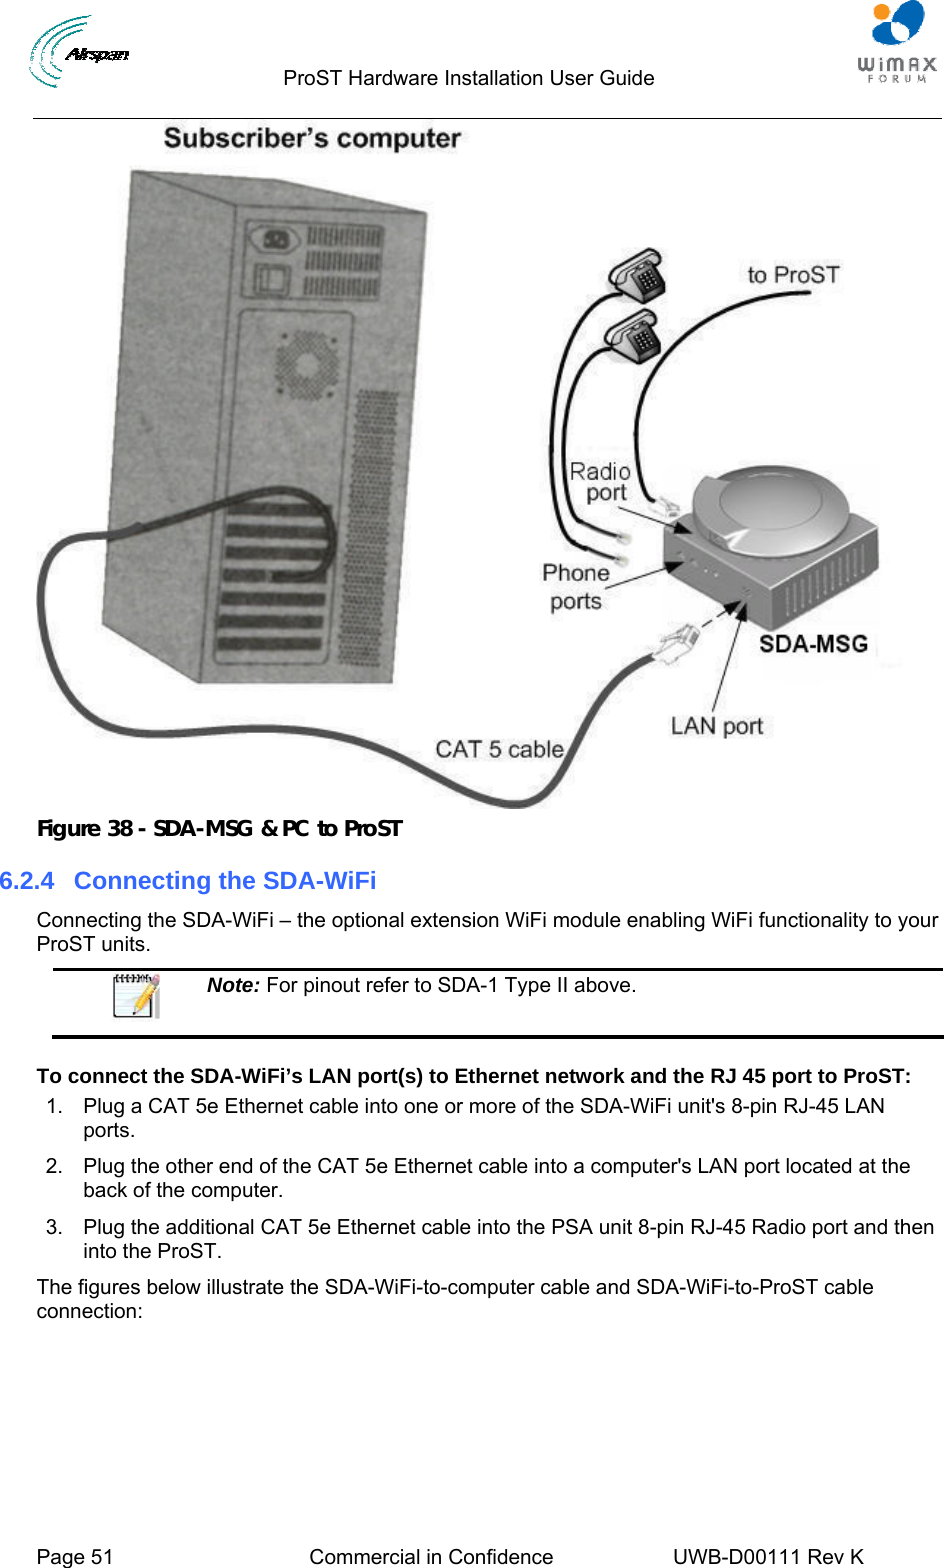                                  ProST Hardware Installation User Guide     Page 51  Commercial in Confidence  UWB-D00111 Rev K    Figure 38 - SDA-MSG &amp; PC to ProST 6.2.4  Connecting the SDA-WiFi Connecting the SDA-WiFi – the optional extension WiFi module enabling WiFi functionality to your ProST units.  Note: For pinout refer to SDA-1 Type II above.  To connect the SDA-WiFi’s LAN port(s) to Ethernet network and the RJ 45 port to ProST: 1.  Plug a CAT 5e Ethernet cable into one or more of the SDA-WiFi unit&apos;s 8-pin RJ-45 LAN ports.  2.  Plug the other end of the CAT 5e Ethernet cable into a computer&apos;s LAN port located at the back of the computer. 3.  Plug the additional CAT 5e Ethernet cable into the PSA unit 8-pin RJ-45 Radio port and then into the ProST. The figures below illustrate the SDA-WiFi-to-computer cable and SDA-WiFi-to-ProST cable connection: 